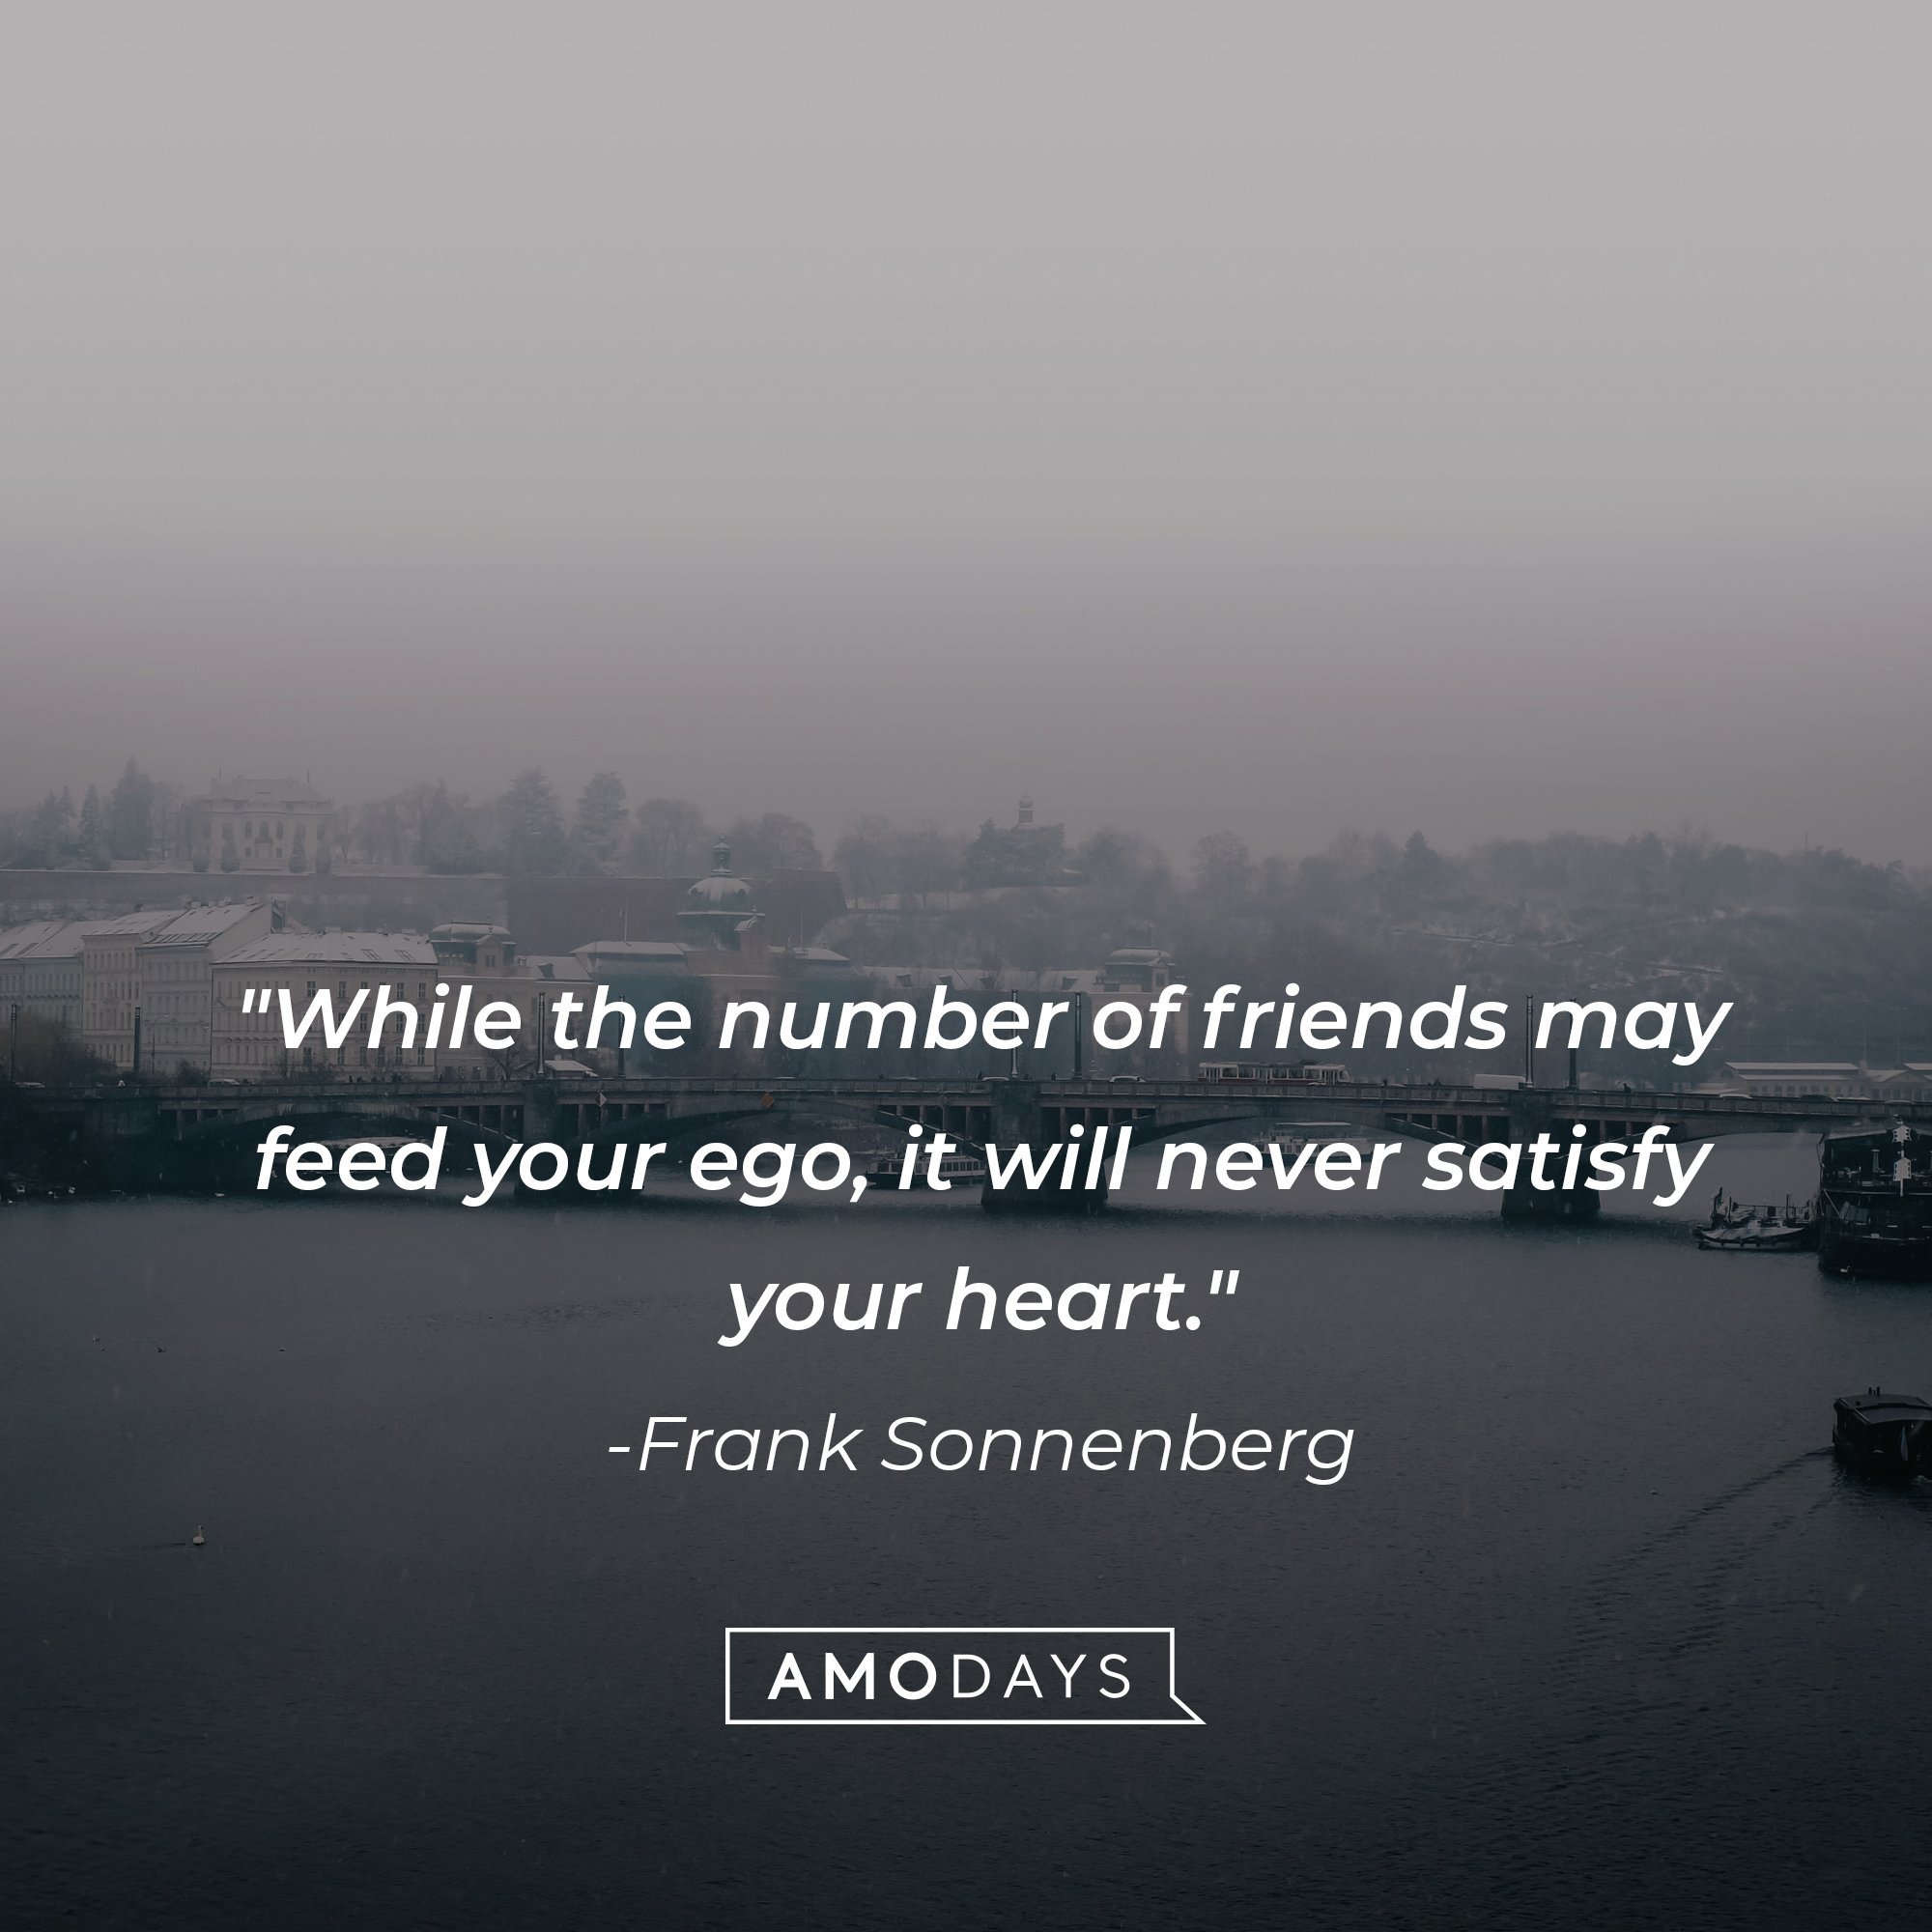 Frank Sonnenberg’s quote: "While the number of friends may feed your ego, it will never satisfy your heart." | Image: AmoDays 